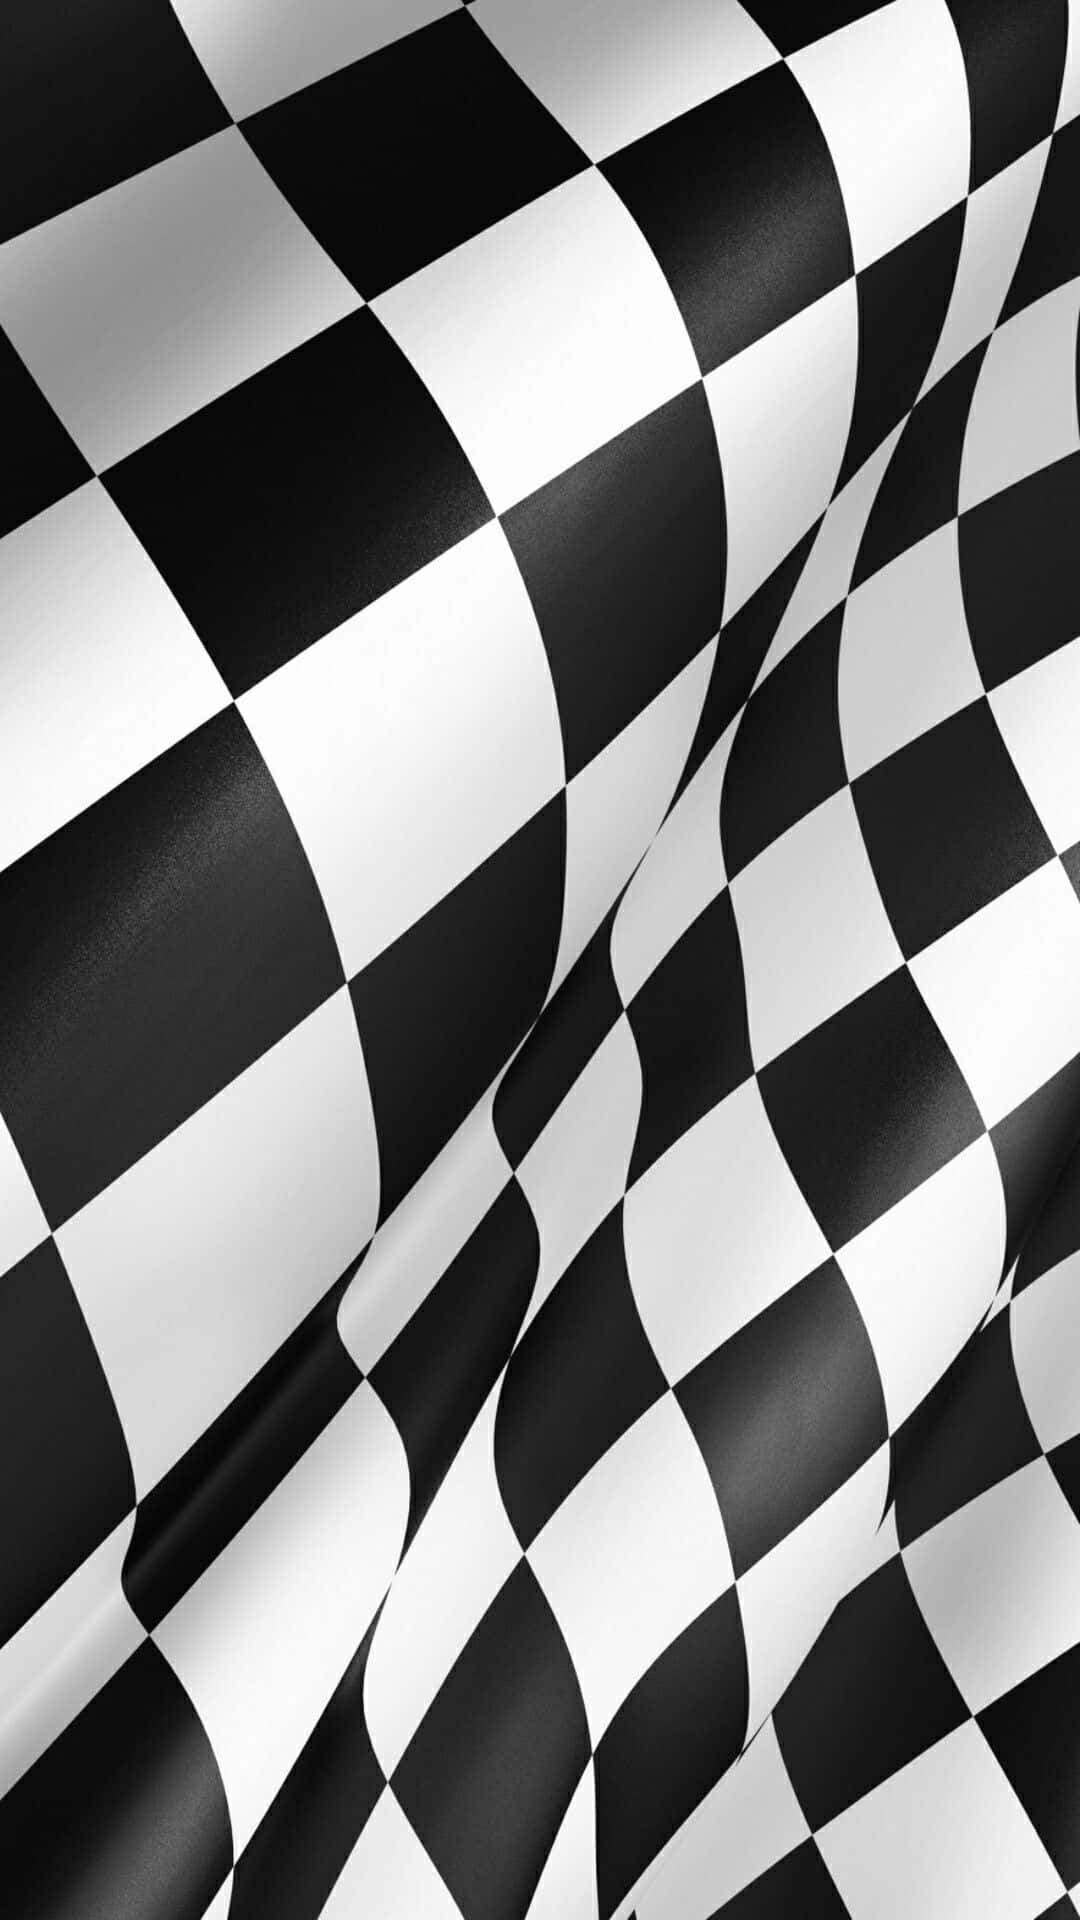 “The World at Your Fingertips with Checkered Flag”